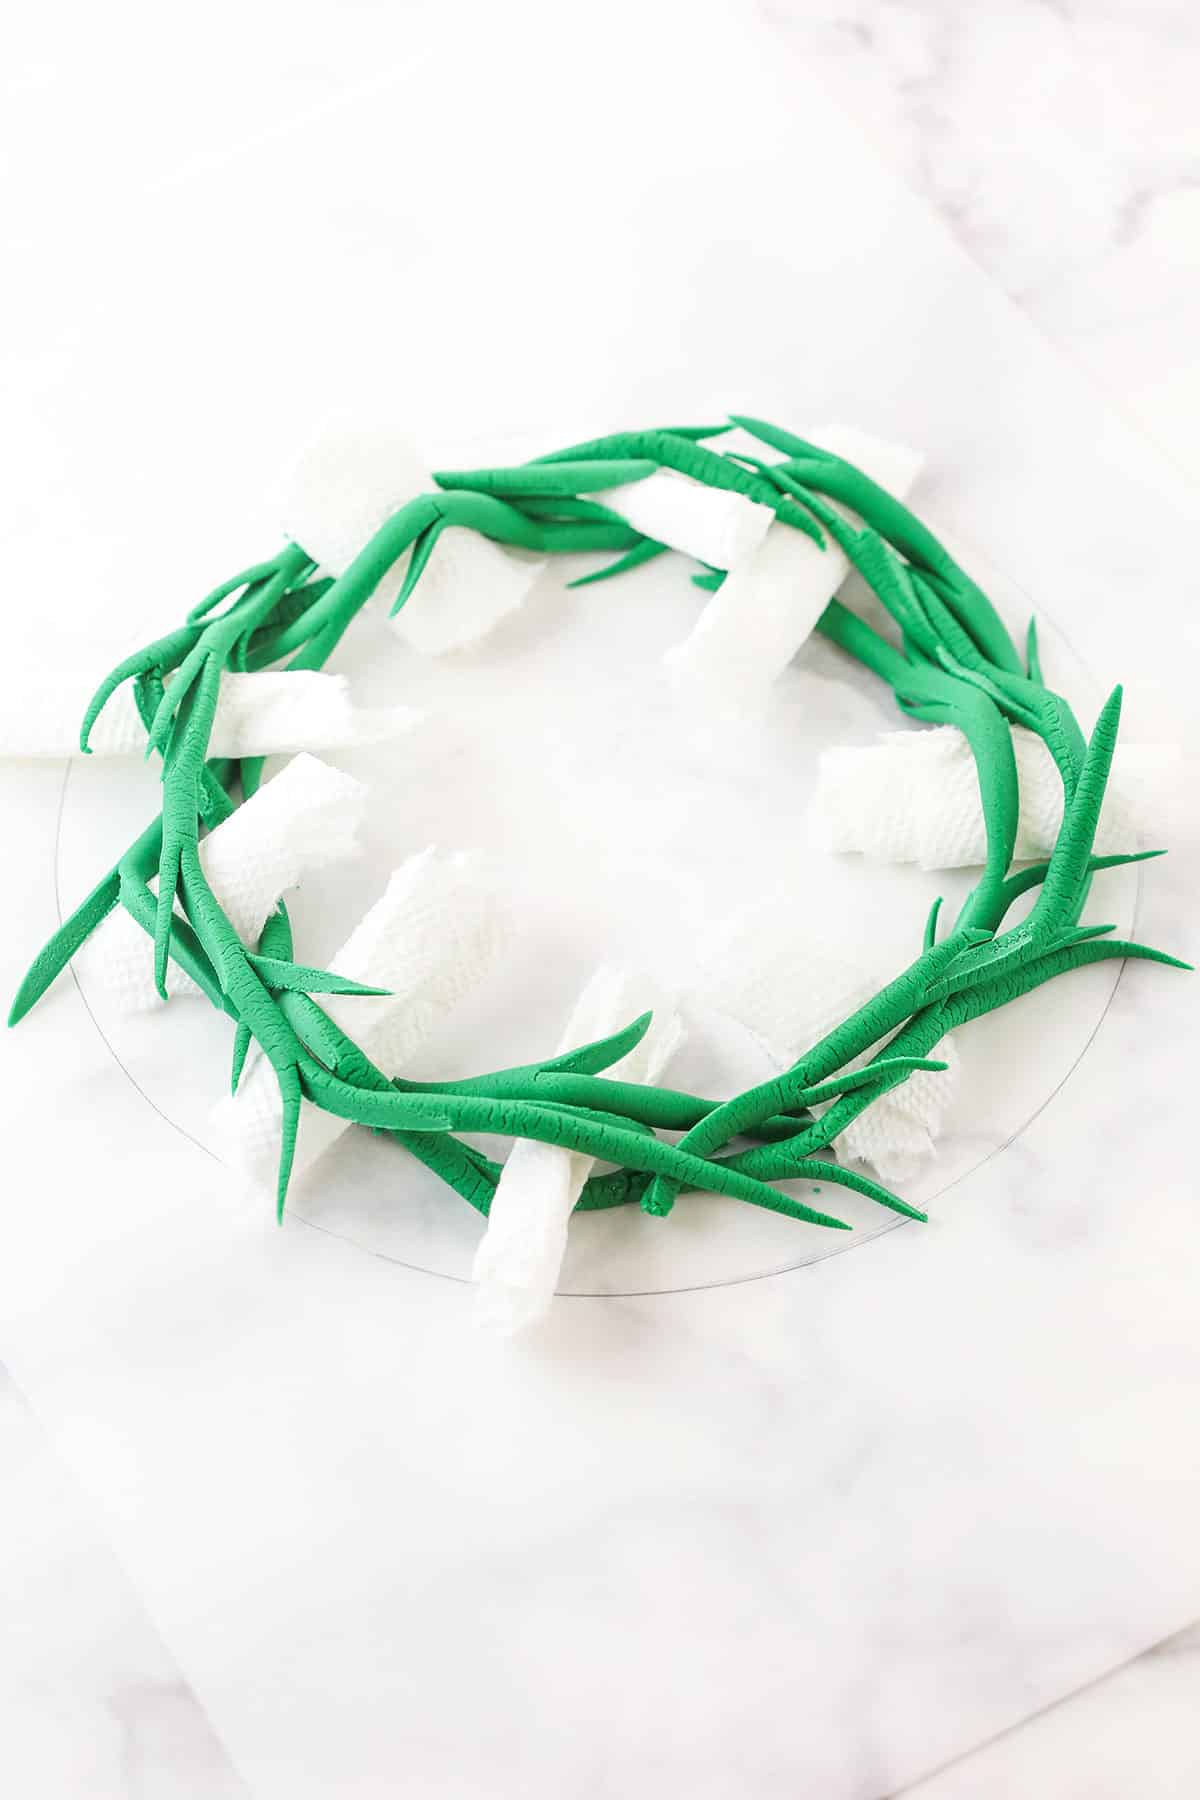 A step in making a Resurrection Cake showing making the crown of thorns